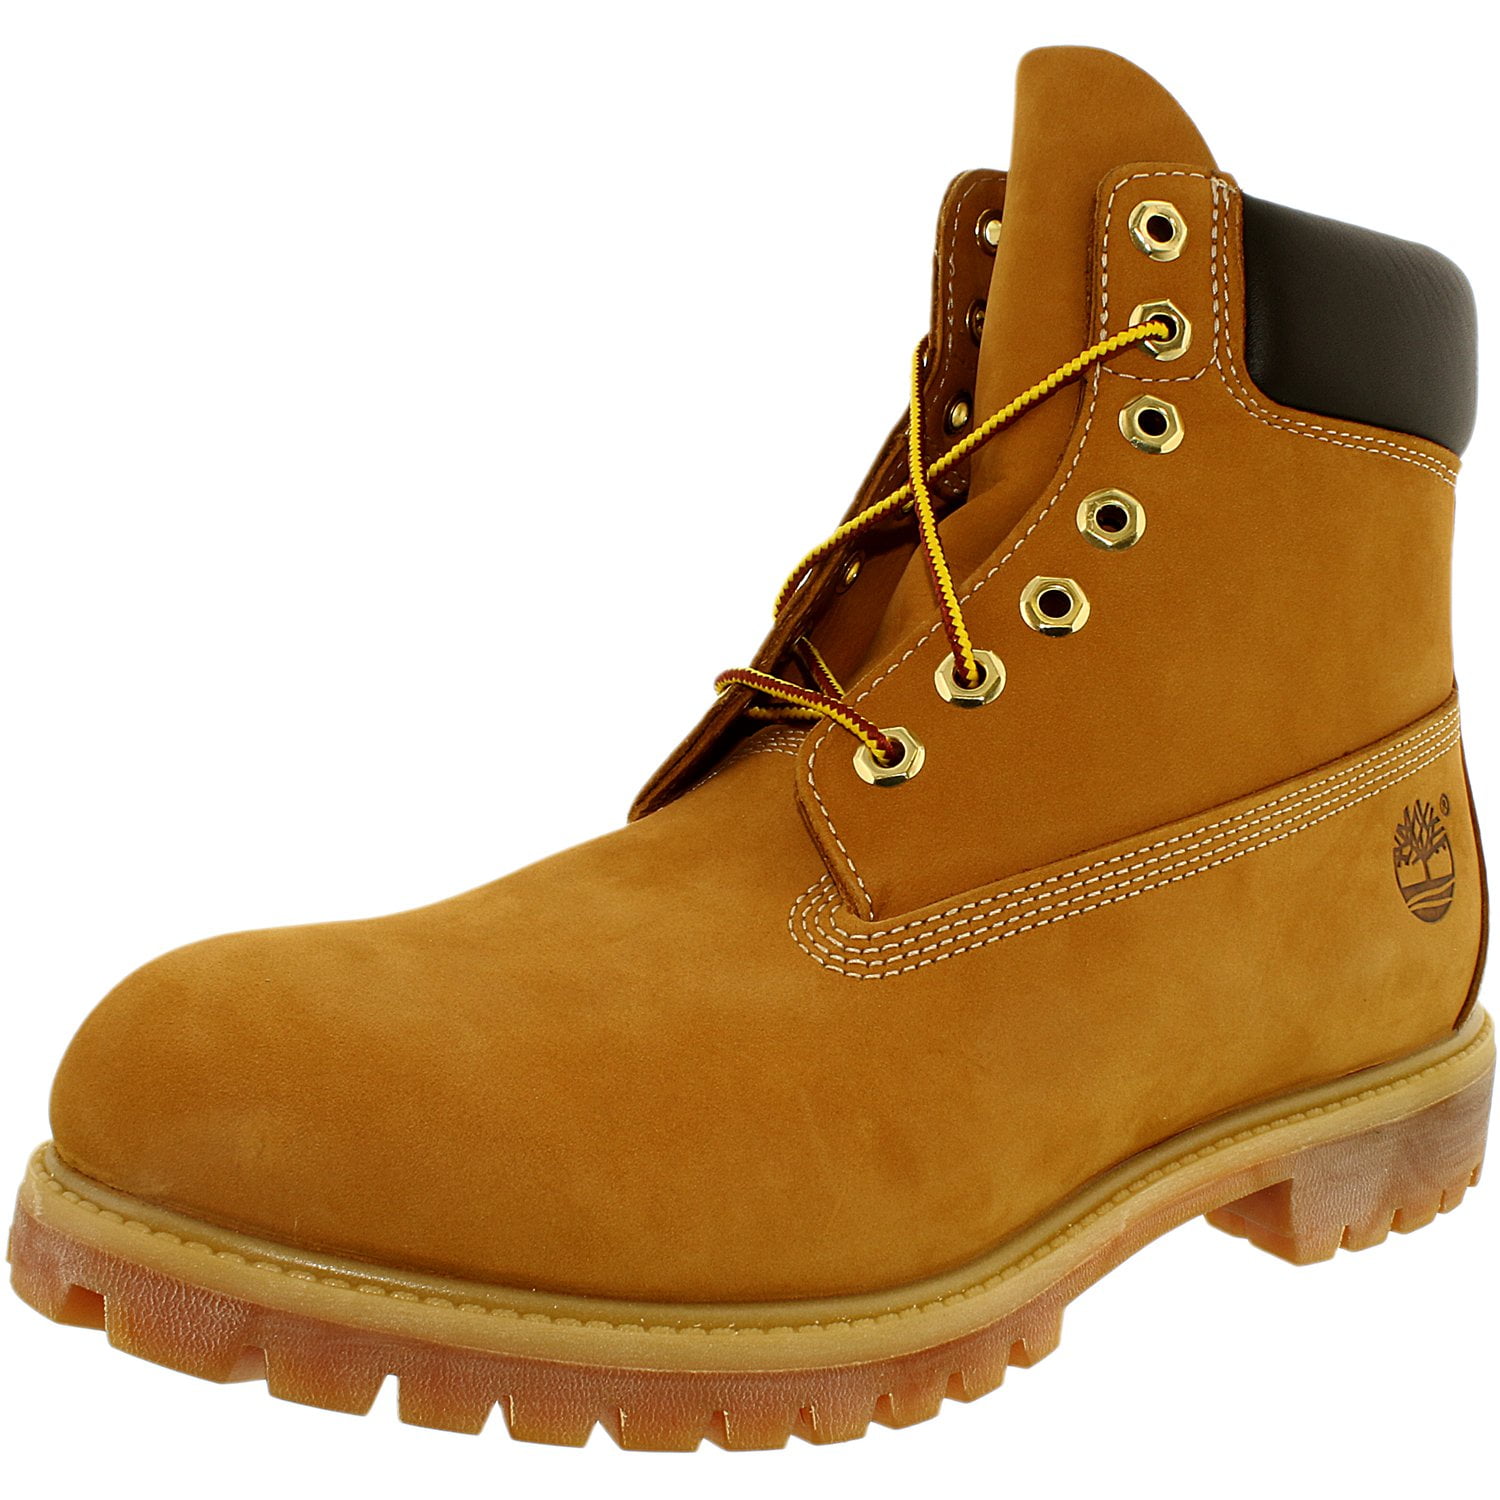 Timberland Men's 6 Inch Premium Boot Leather Wheat Yellow Ankle-High ...